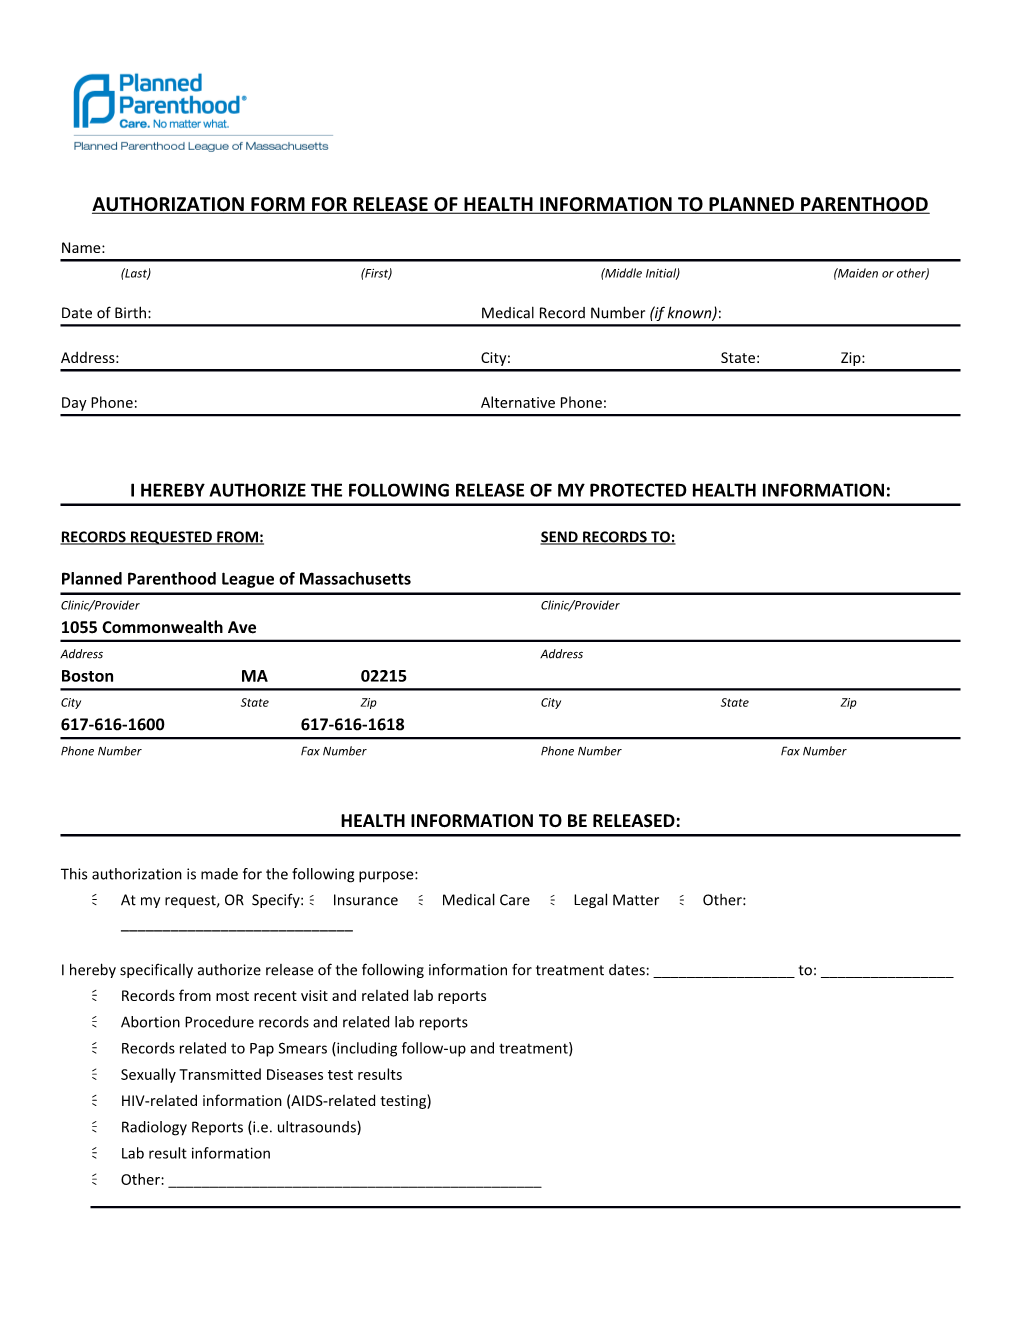 Authorization Form for Release of Health Information to Planned Parenthood